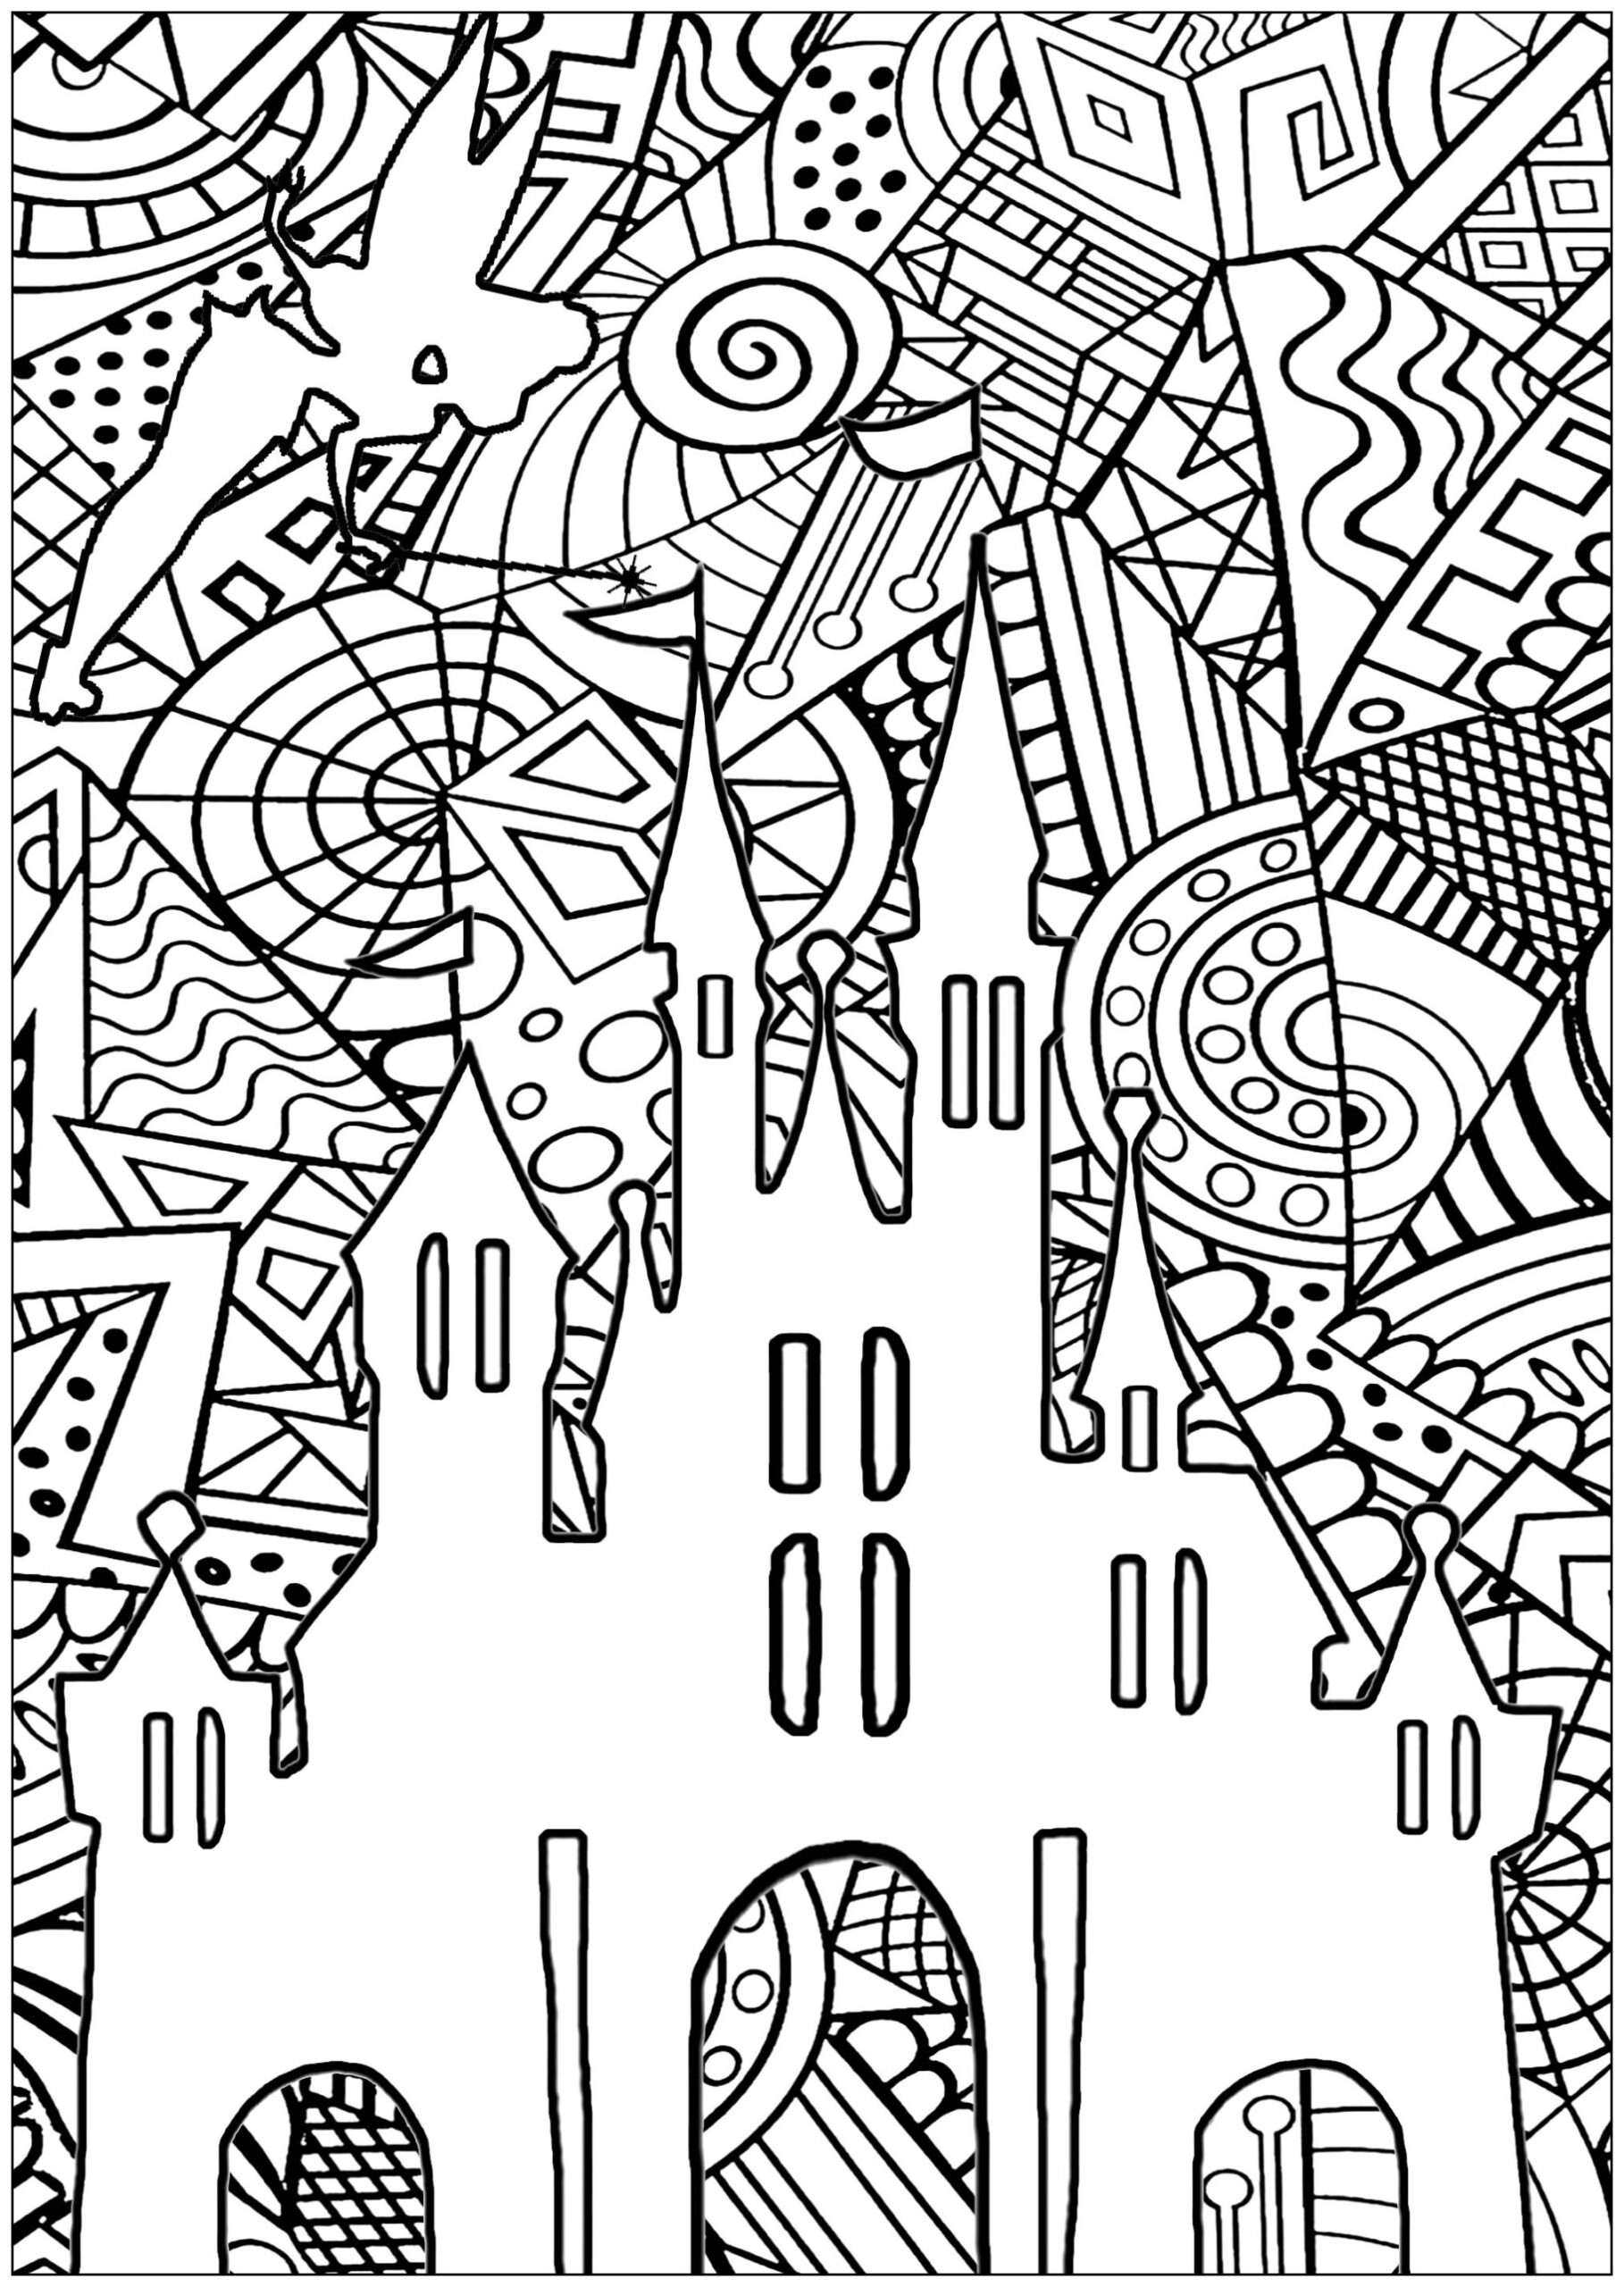 Disney castle - Return to childhood Adult Coloring Pages